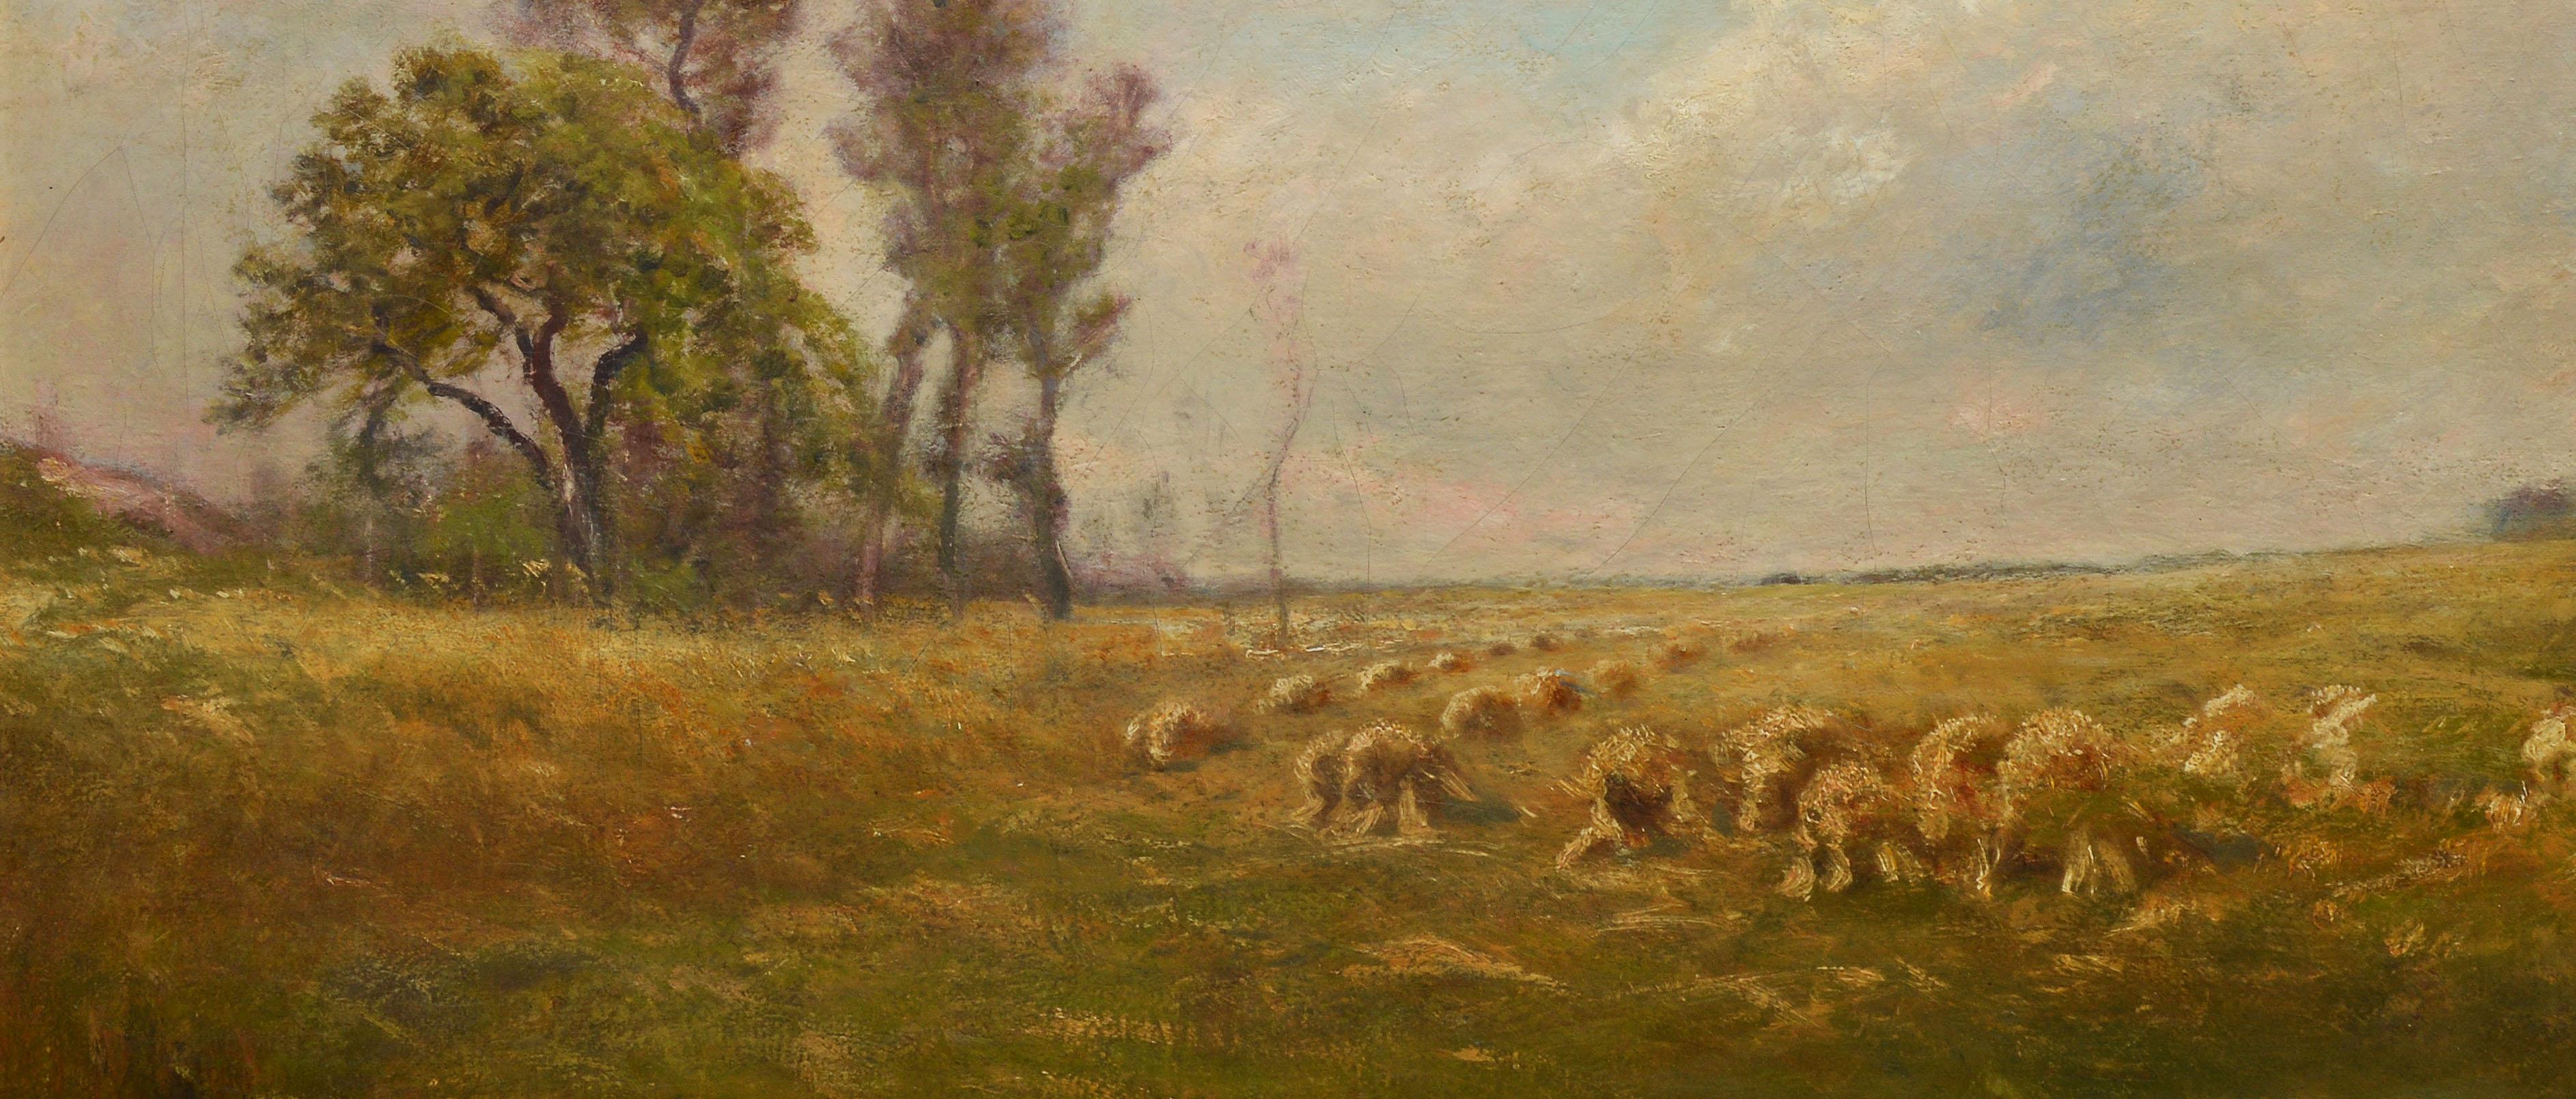 Impressionist landscape with sheep grazing by Edward B Gay  (1837 - 1928).  Oil on canvas, circa 1880.  Signed lower left.  Housed in a period giltwood frame. Image size, 27